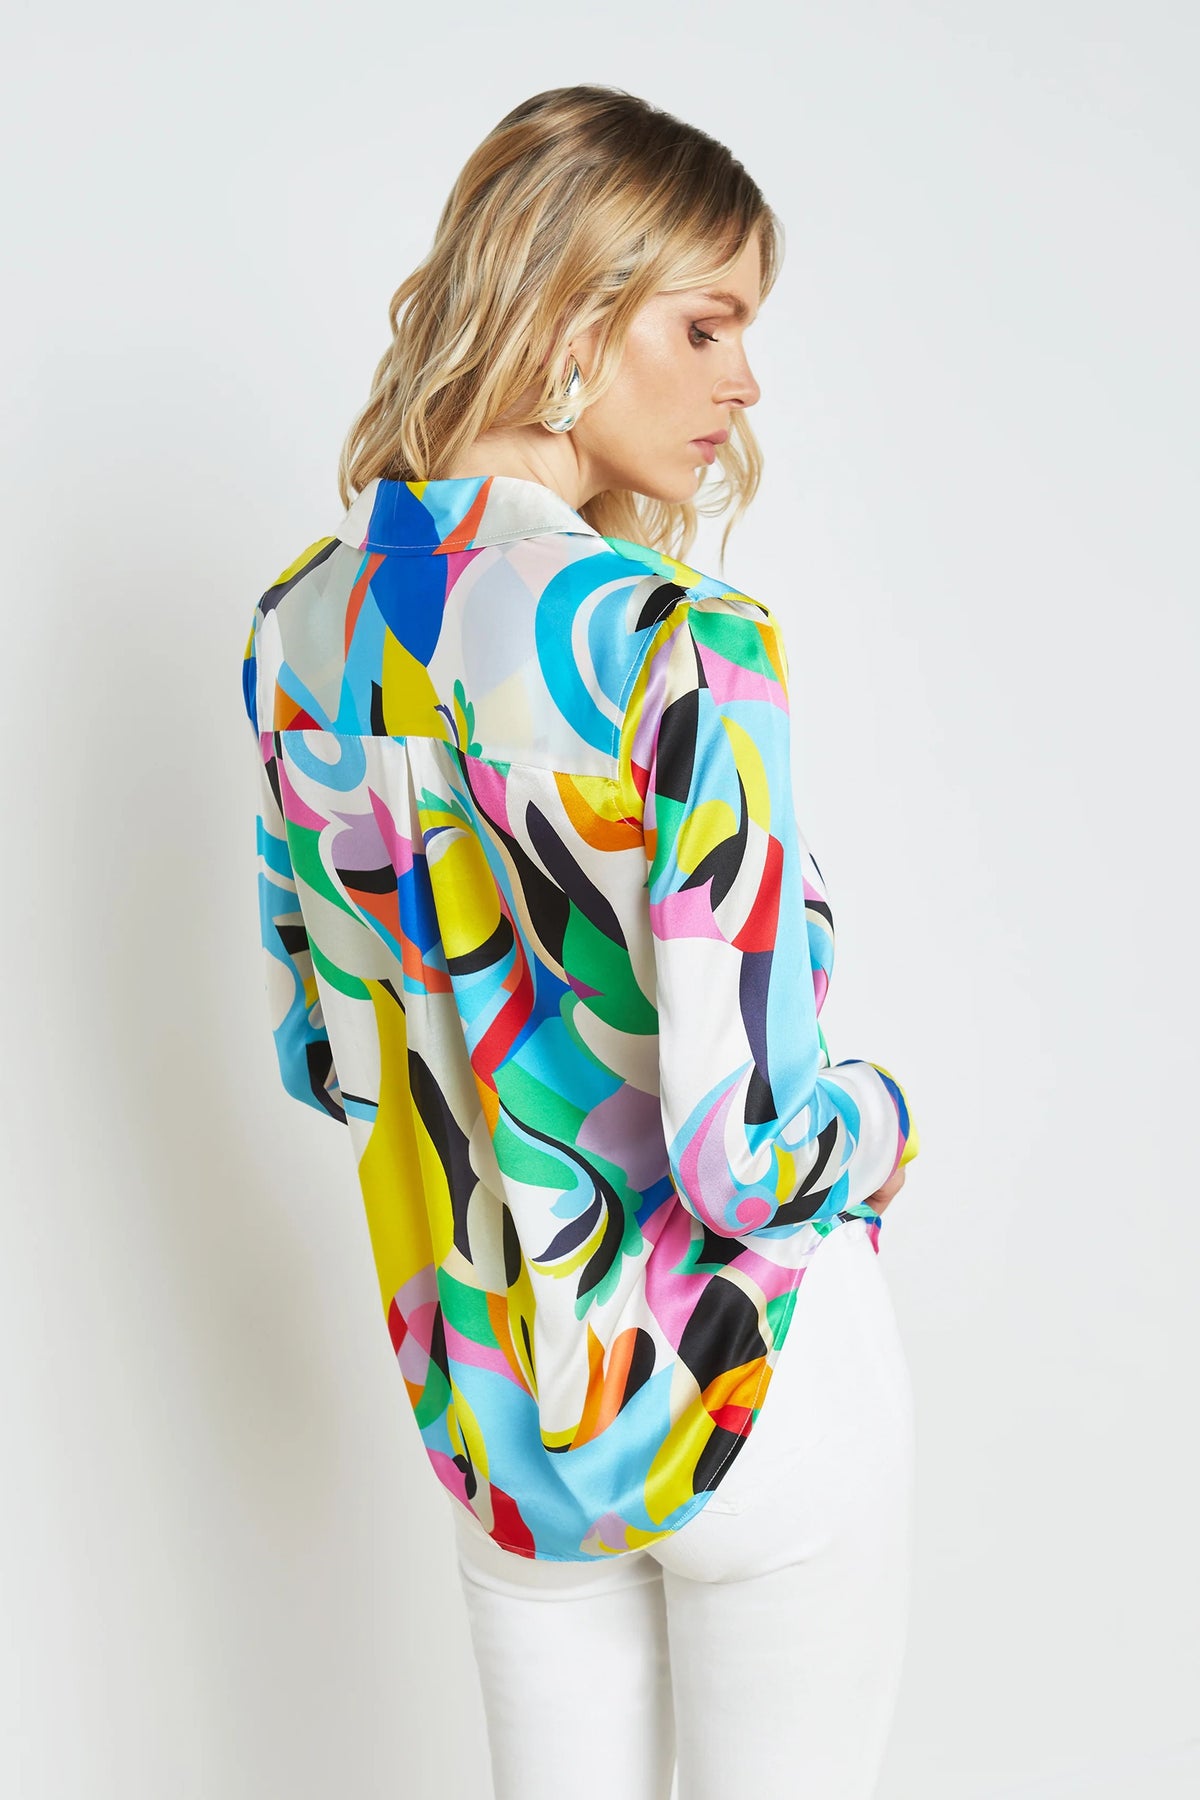 L'Agence Tyler Small Multi Kaleidoscope Blouse à manches longues